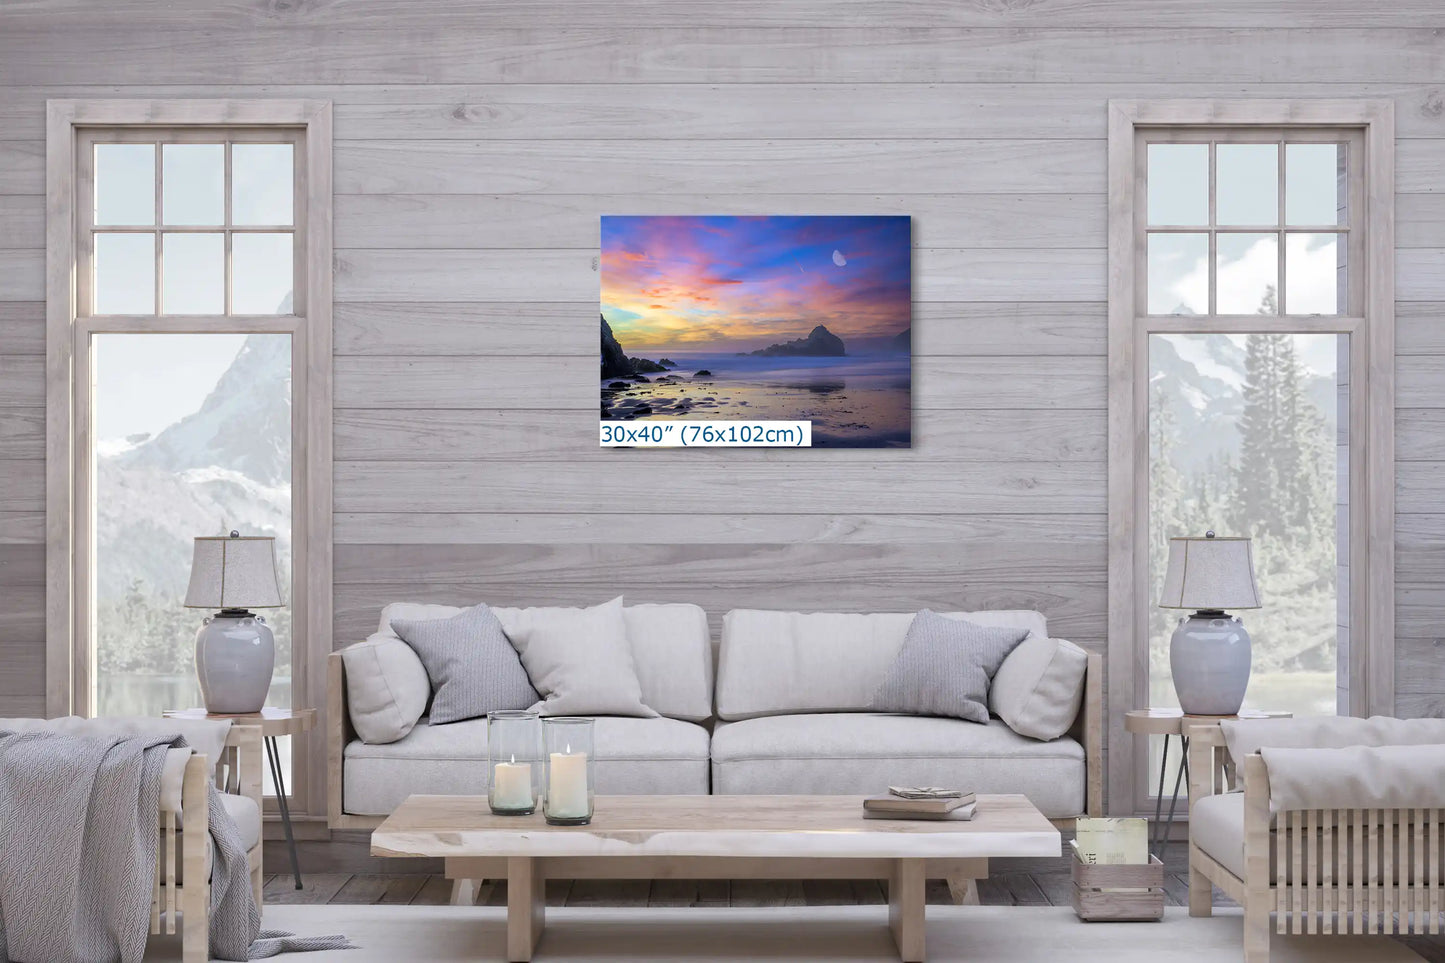 A large 30x40-inch canvas of Big Sur's purple beach at dusk adds a calming, luxurious touch to a cozy living room setting.